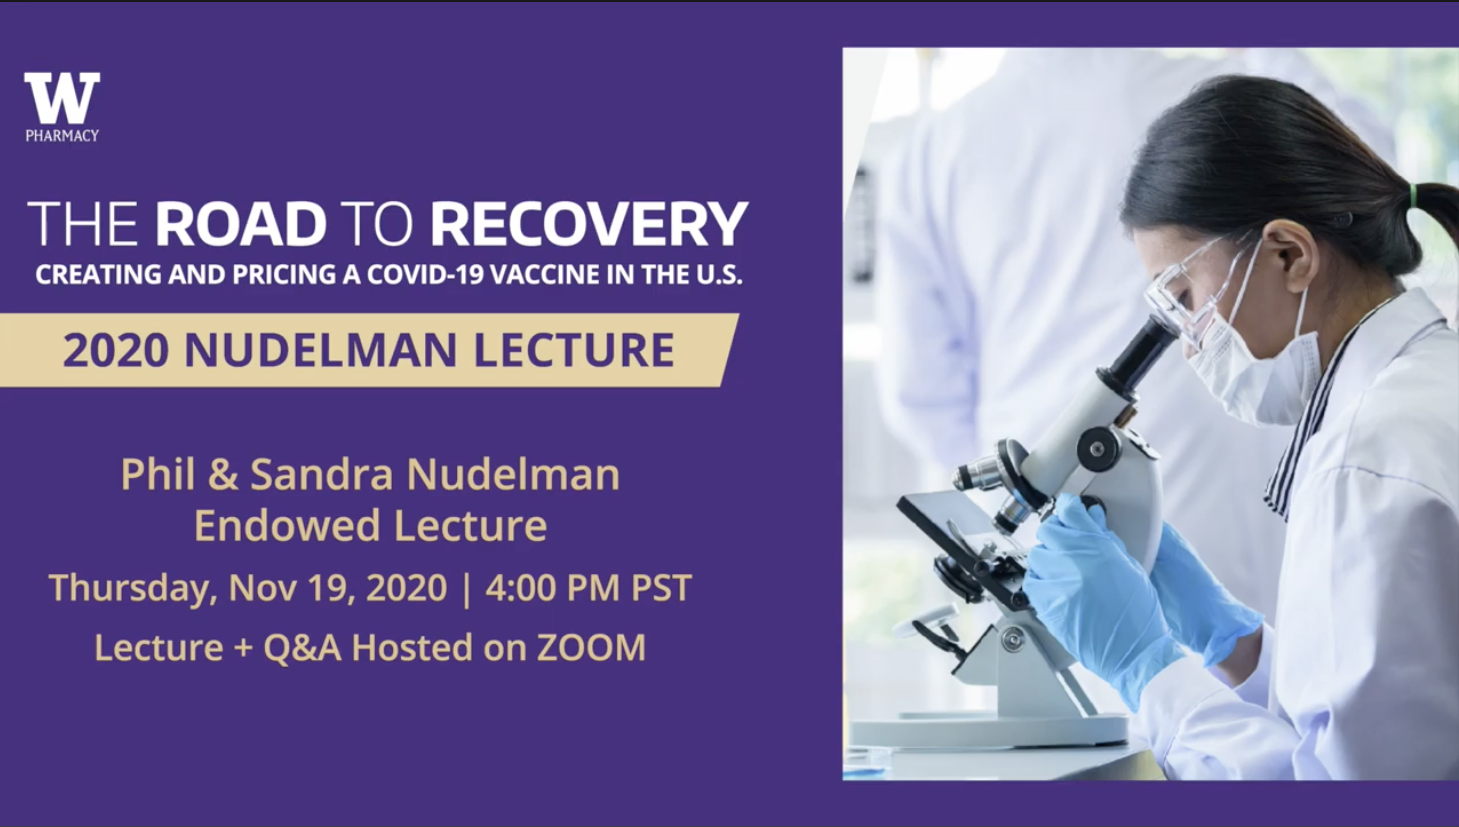  The Road to Recovery: Creating and Pricing a COVID-19 Vaccine in the U.S.